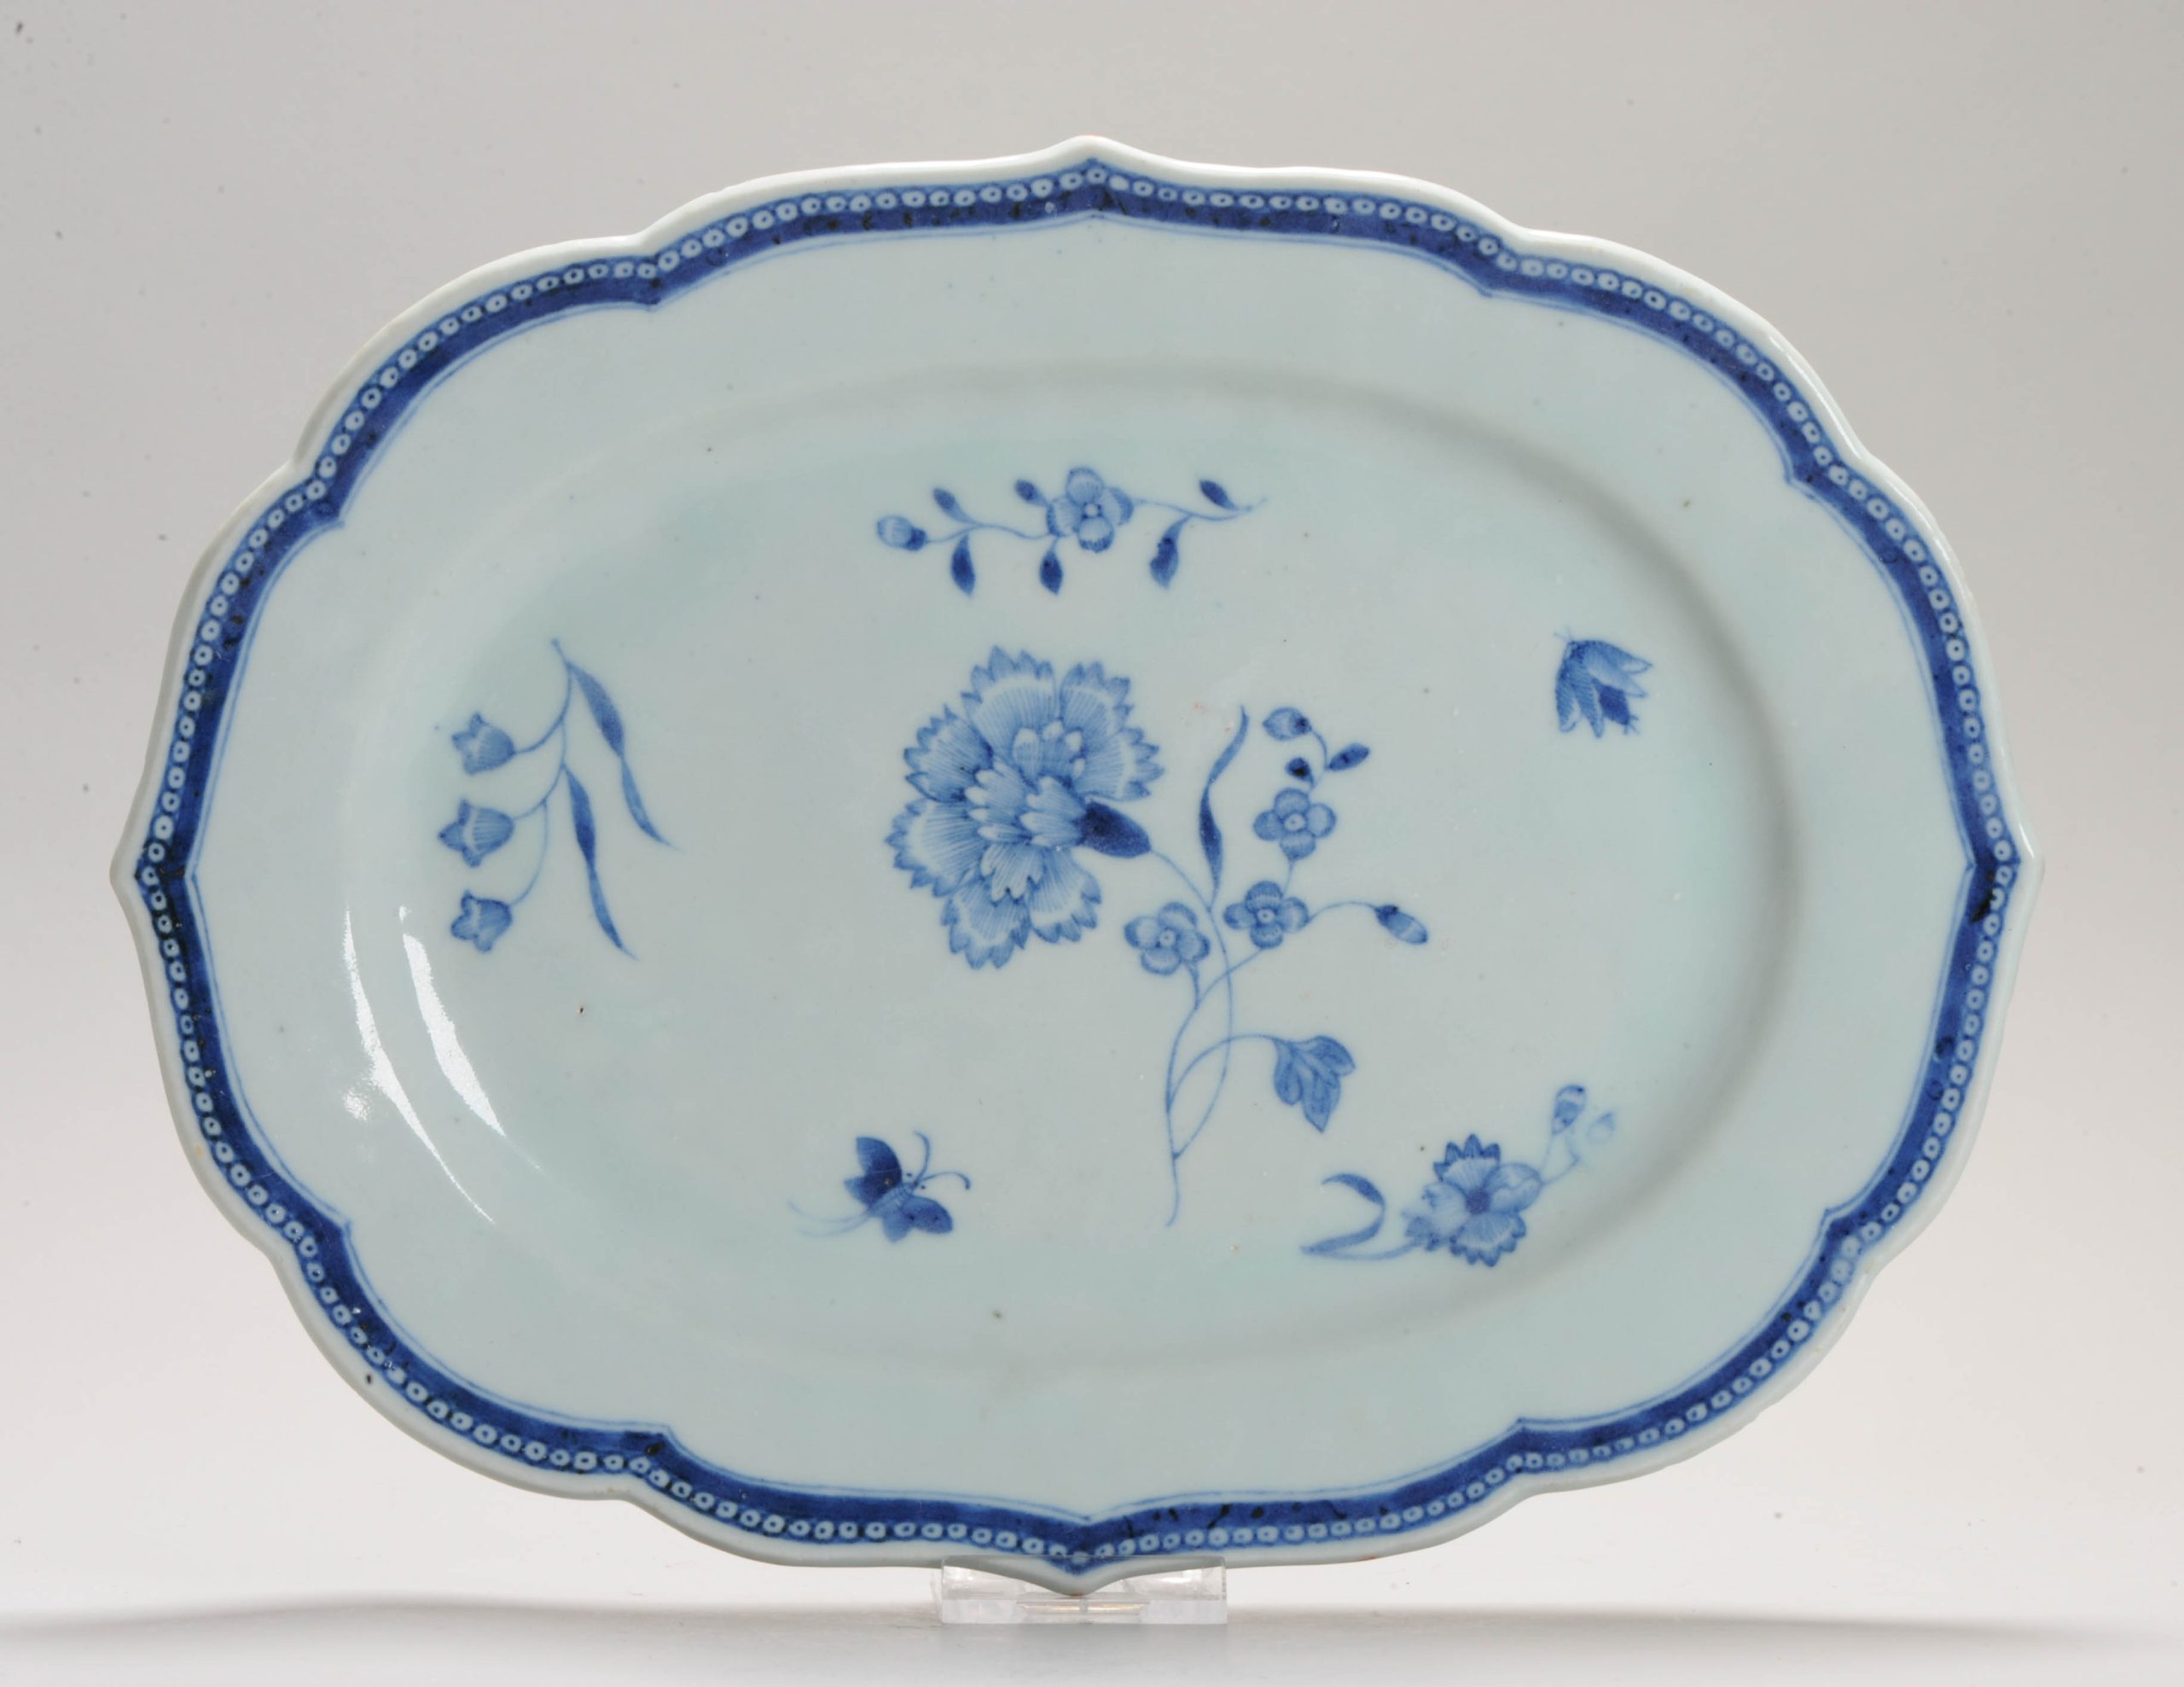 Antique Serving Dish 18th Century Chinese Porcelain Blue and White Qianlong